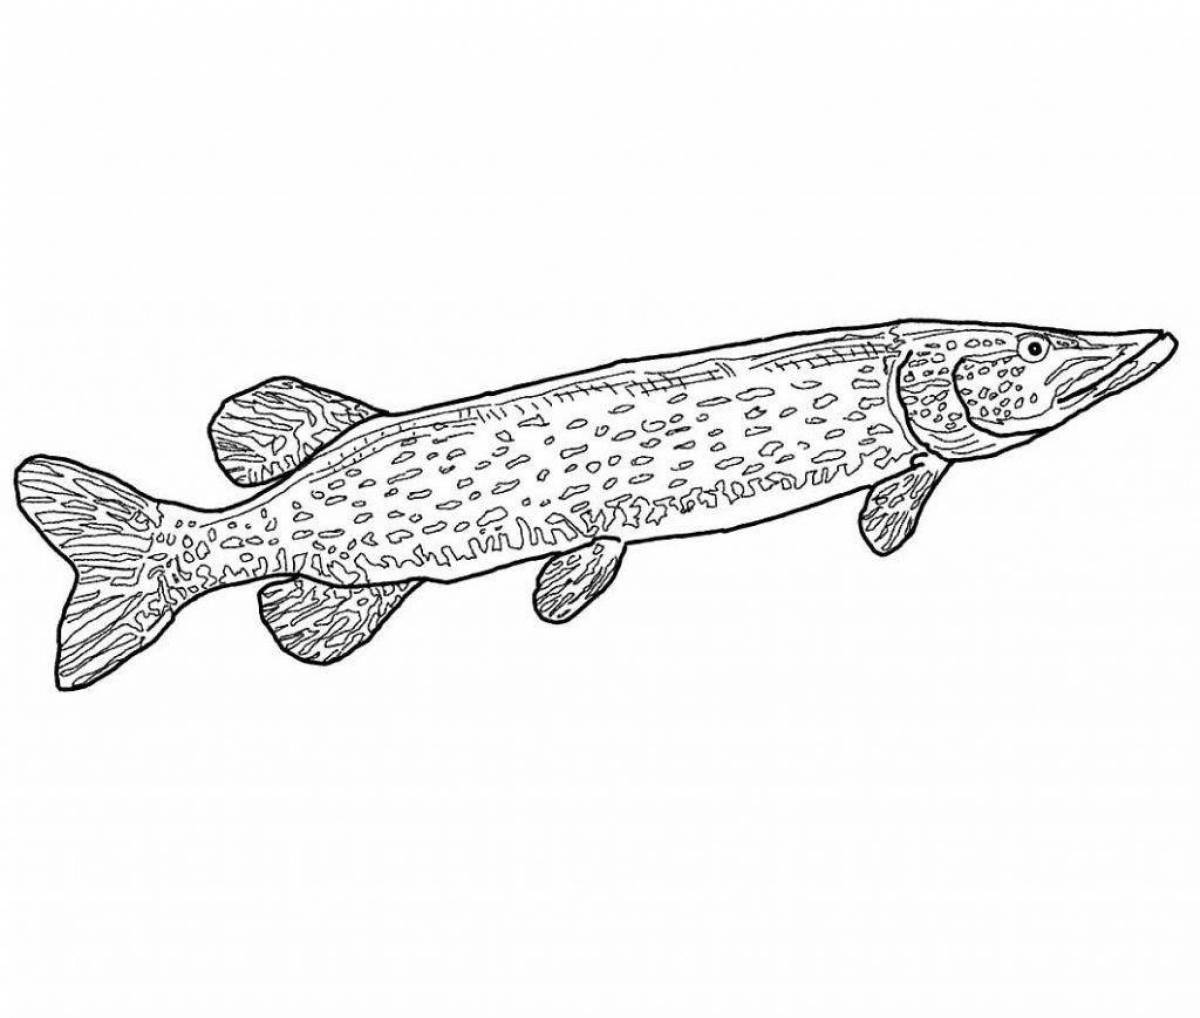 Coloring pike for the little ones